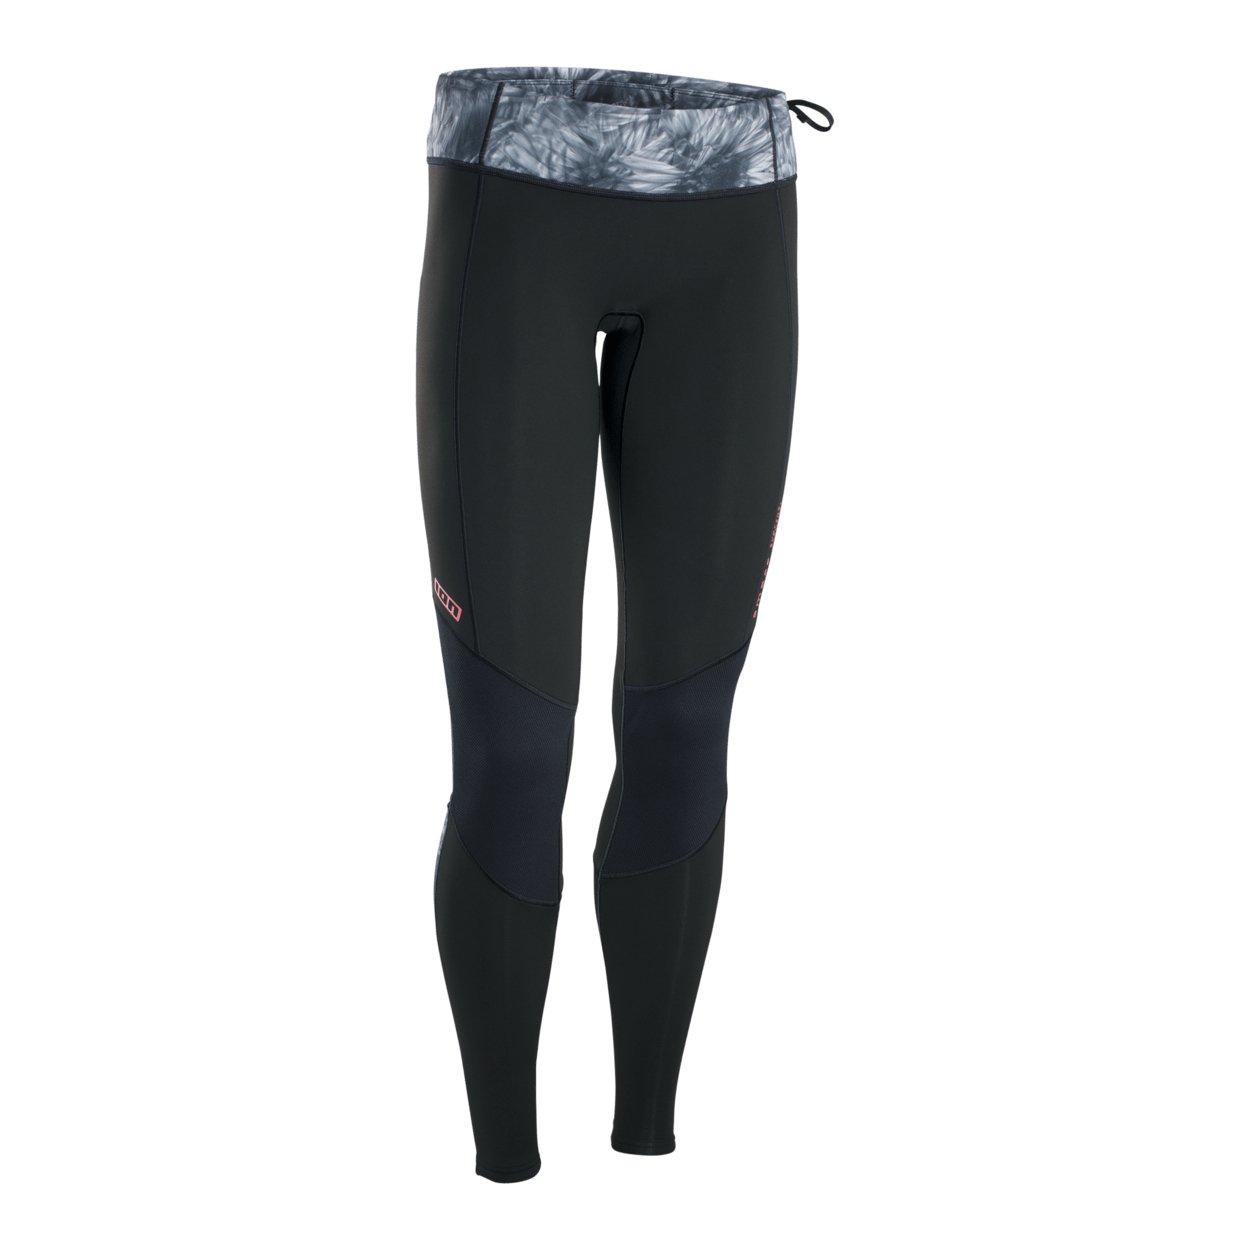 ION Amaze Long Pants 1.5 2023 - Worthing Watersports - 9010583091433 - Wetsuits - ION Water